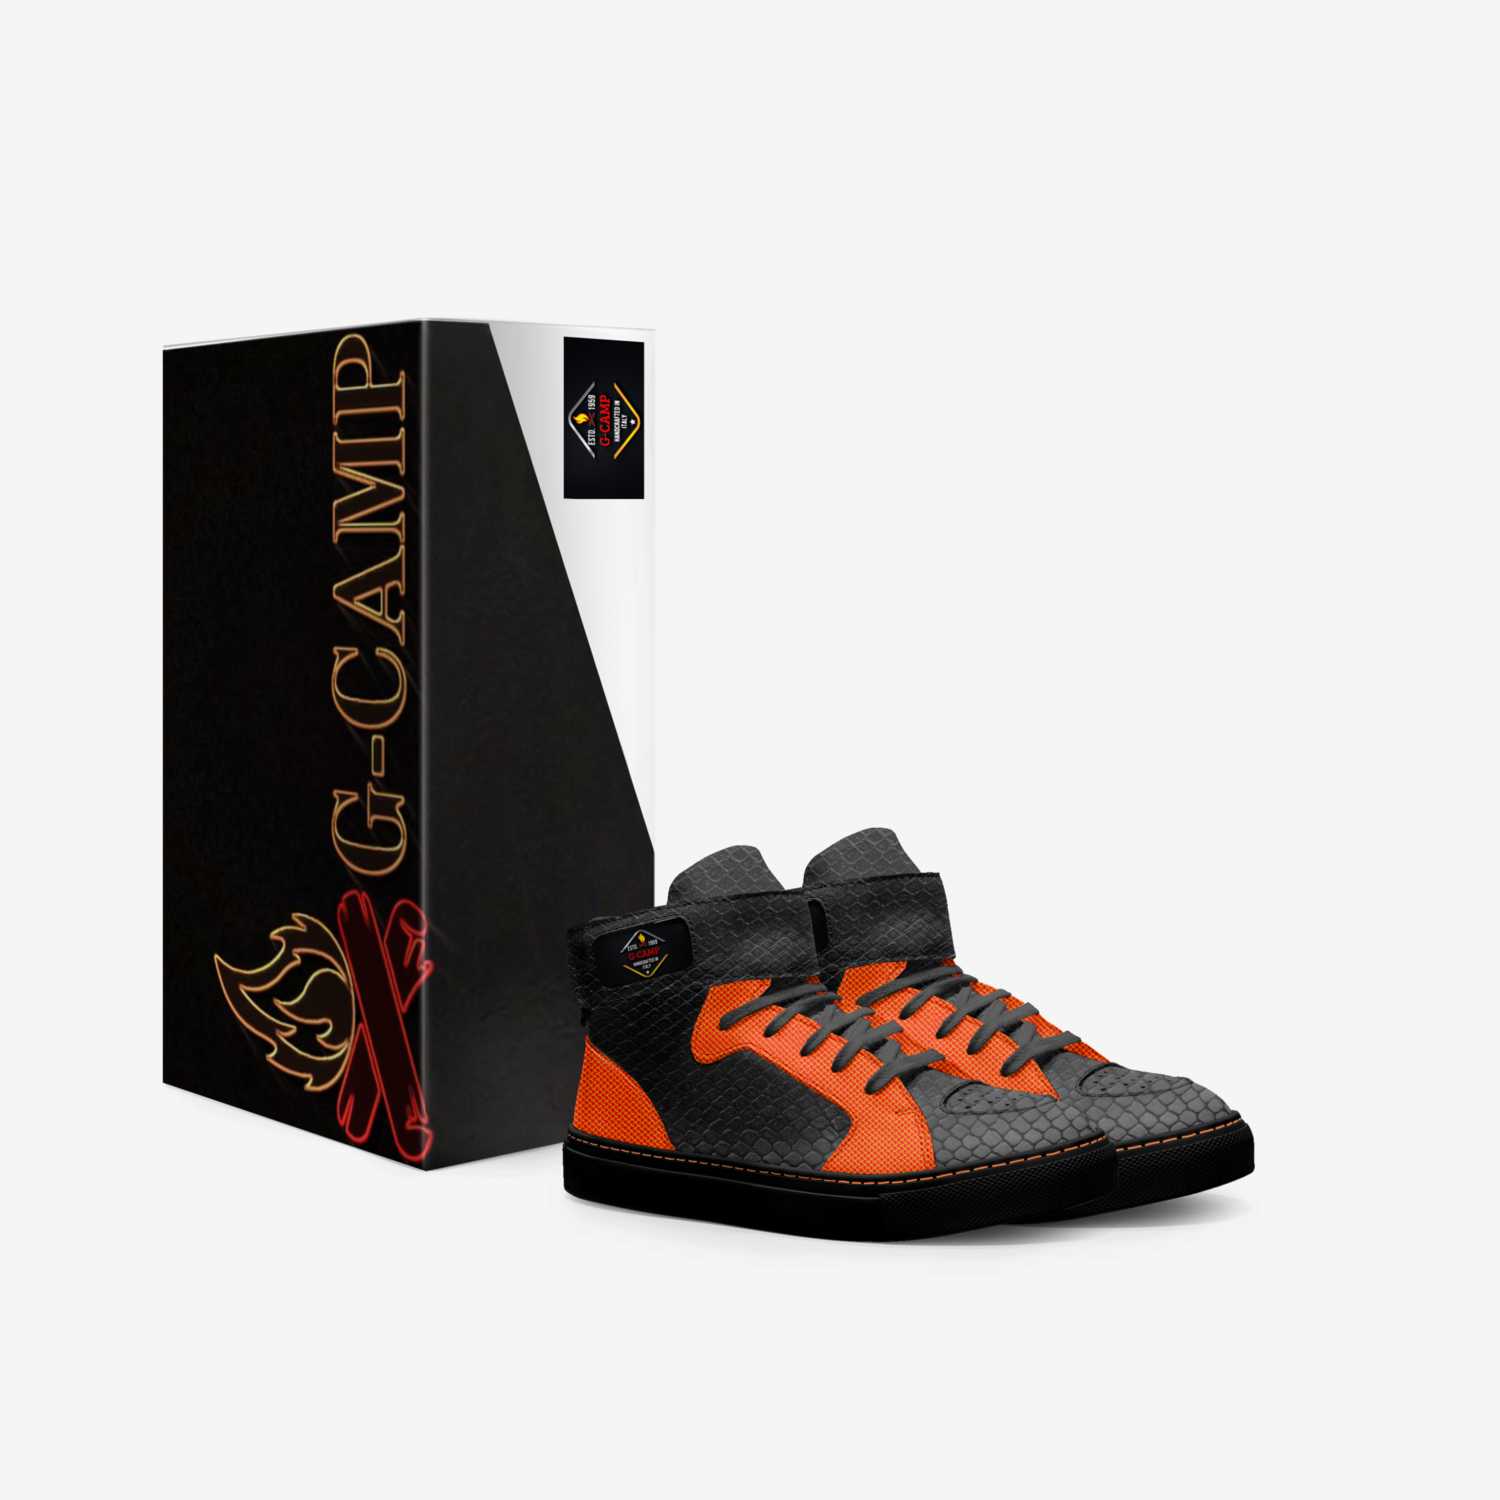 G-CAMP custom made in Italy shoes by Antonio Goodwin | Box view